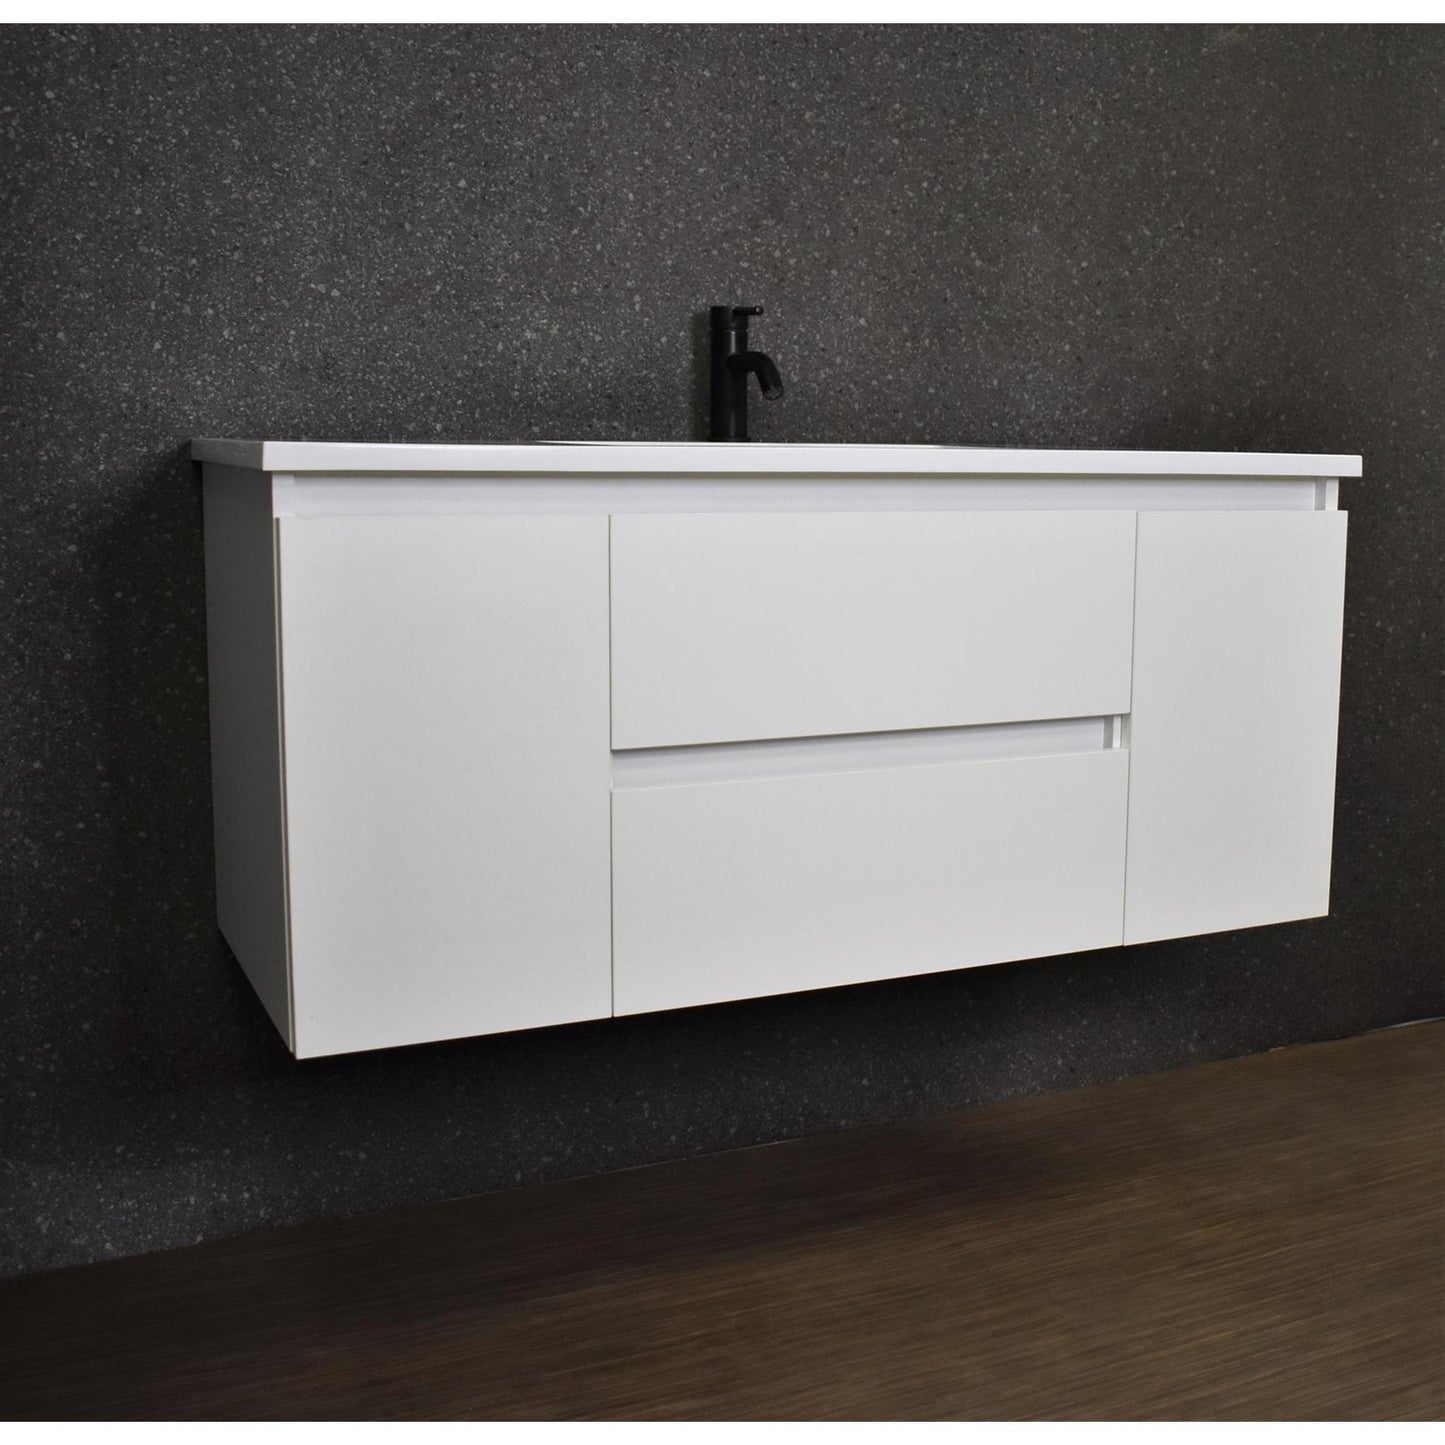 Volpa USA Salt 48" x 20" Glossy White Wall-Mounted Floating Bathroom Vanity With Drawers, Acrylic Top and Integrated Acrylic Sink